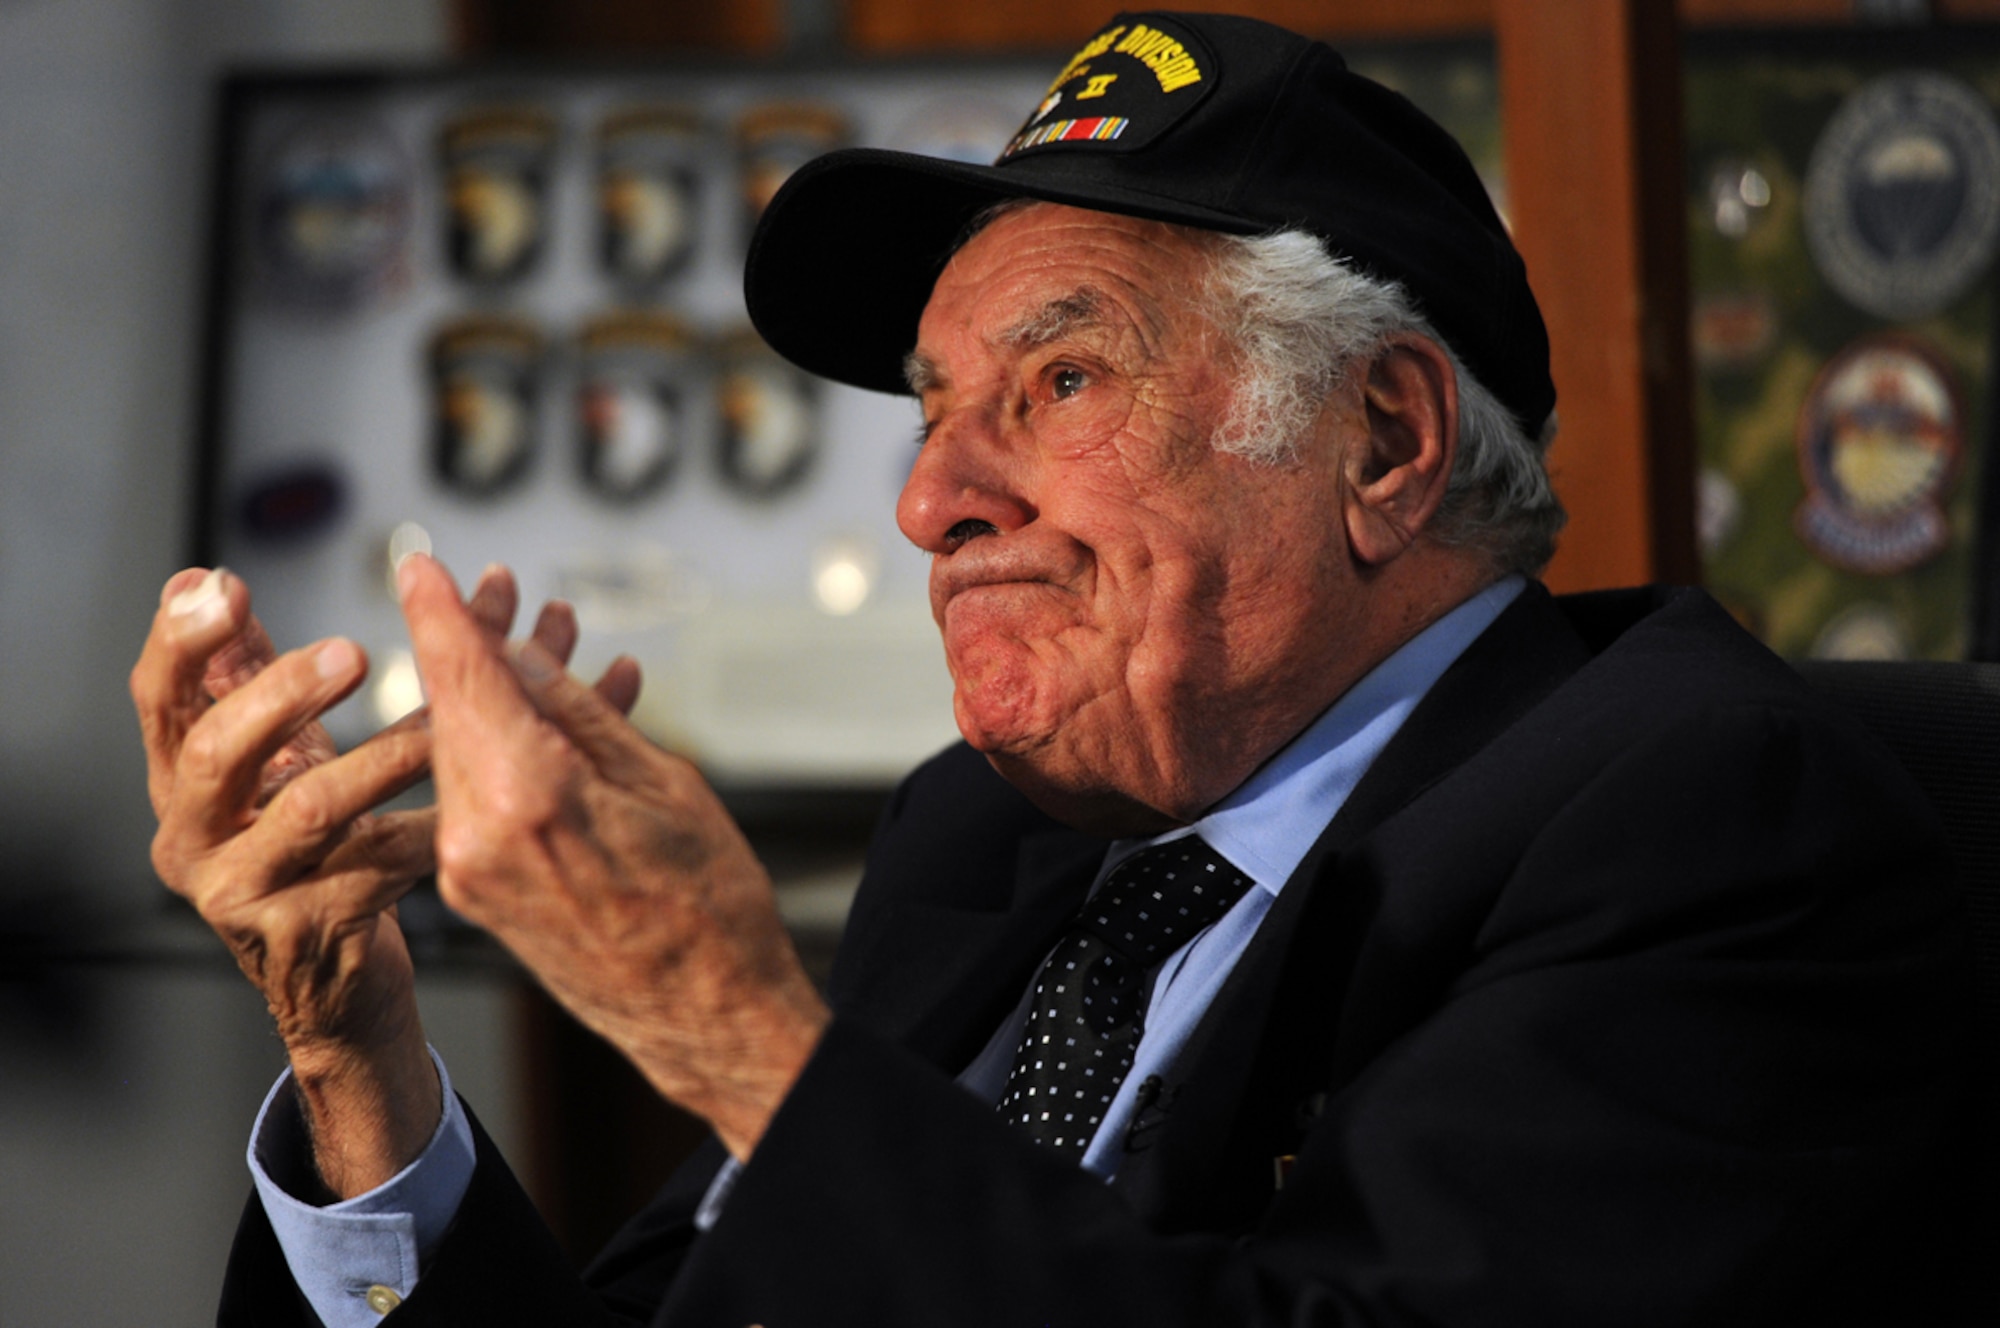 World War II veteran Vincent Speranza, 88, from Auburn Ill., is overcome with emotion and his eyes well with tears as he pauses while recounting his experiences fighting in the siege of Bastogne during the Battle of the Bulge while visiting with Soldiers of the 1st Battalion (Airborne), 501st Infantry Regiment, part of U.S. Army Alaska's 4th Infantry Brigade Combat Team (Airborne), 25th Infantry Division, at Joint Base Elmendorf-Richardson, Alaska, Nov. 6. Speranza, a combat veteran of H Company, 501st Parachute Infantry Regiment, then part of the 101st Airborne Division, fought at Bastogne, was wounded in combat shortly after the Battle of the Bulge, and when the 101st Airborne deactivated after the war was transferred to the 82nd Airborne for a brief period. (U.S. Air Force photo by Justin Connaher/Released)